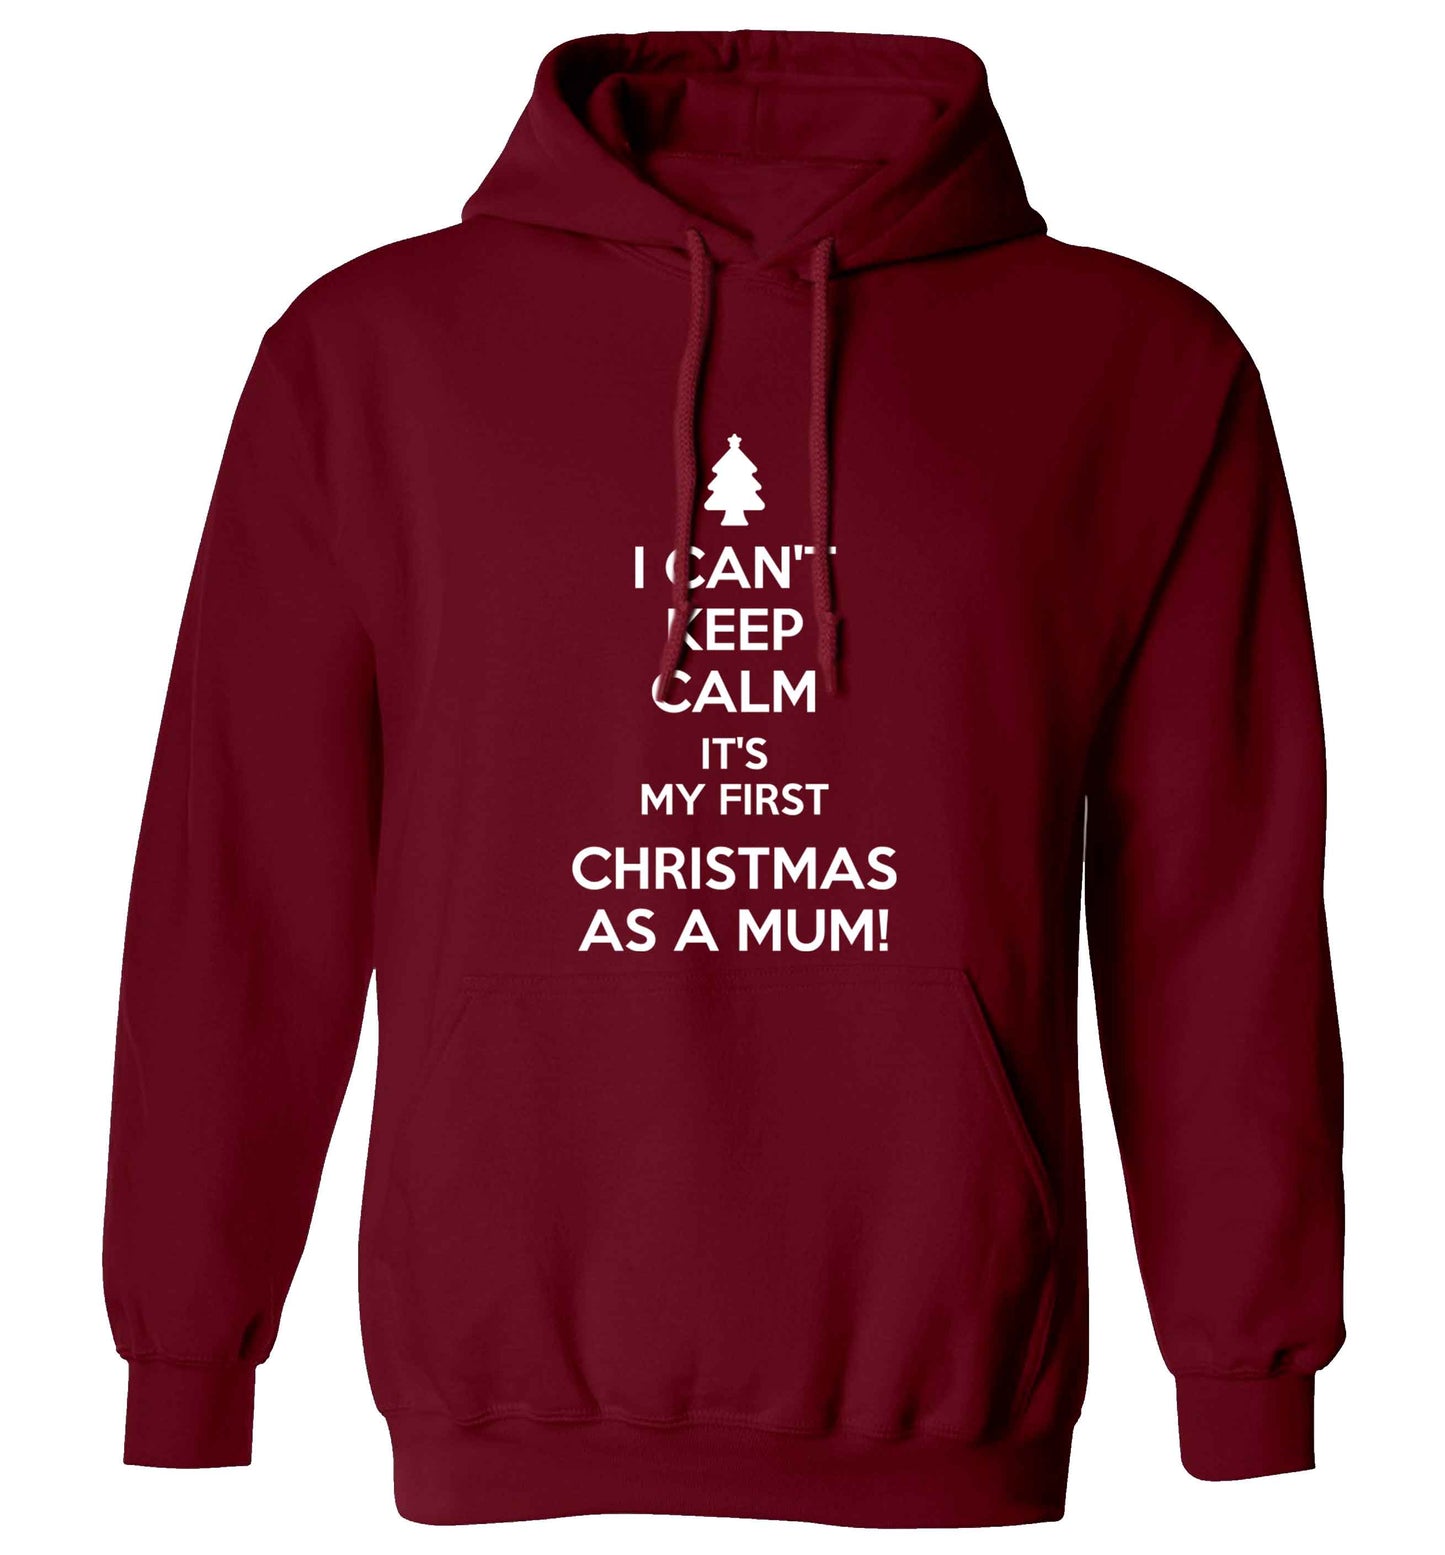 I can't keep calm it's my first Christmas as a mum adults unisex maroon hoodie 2XL